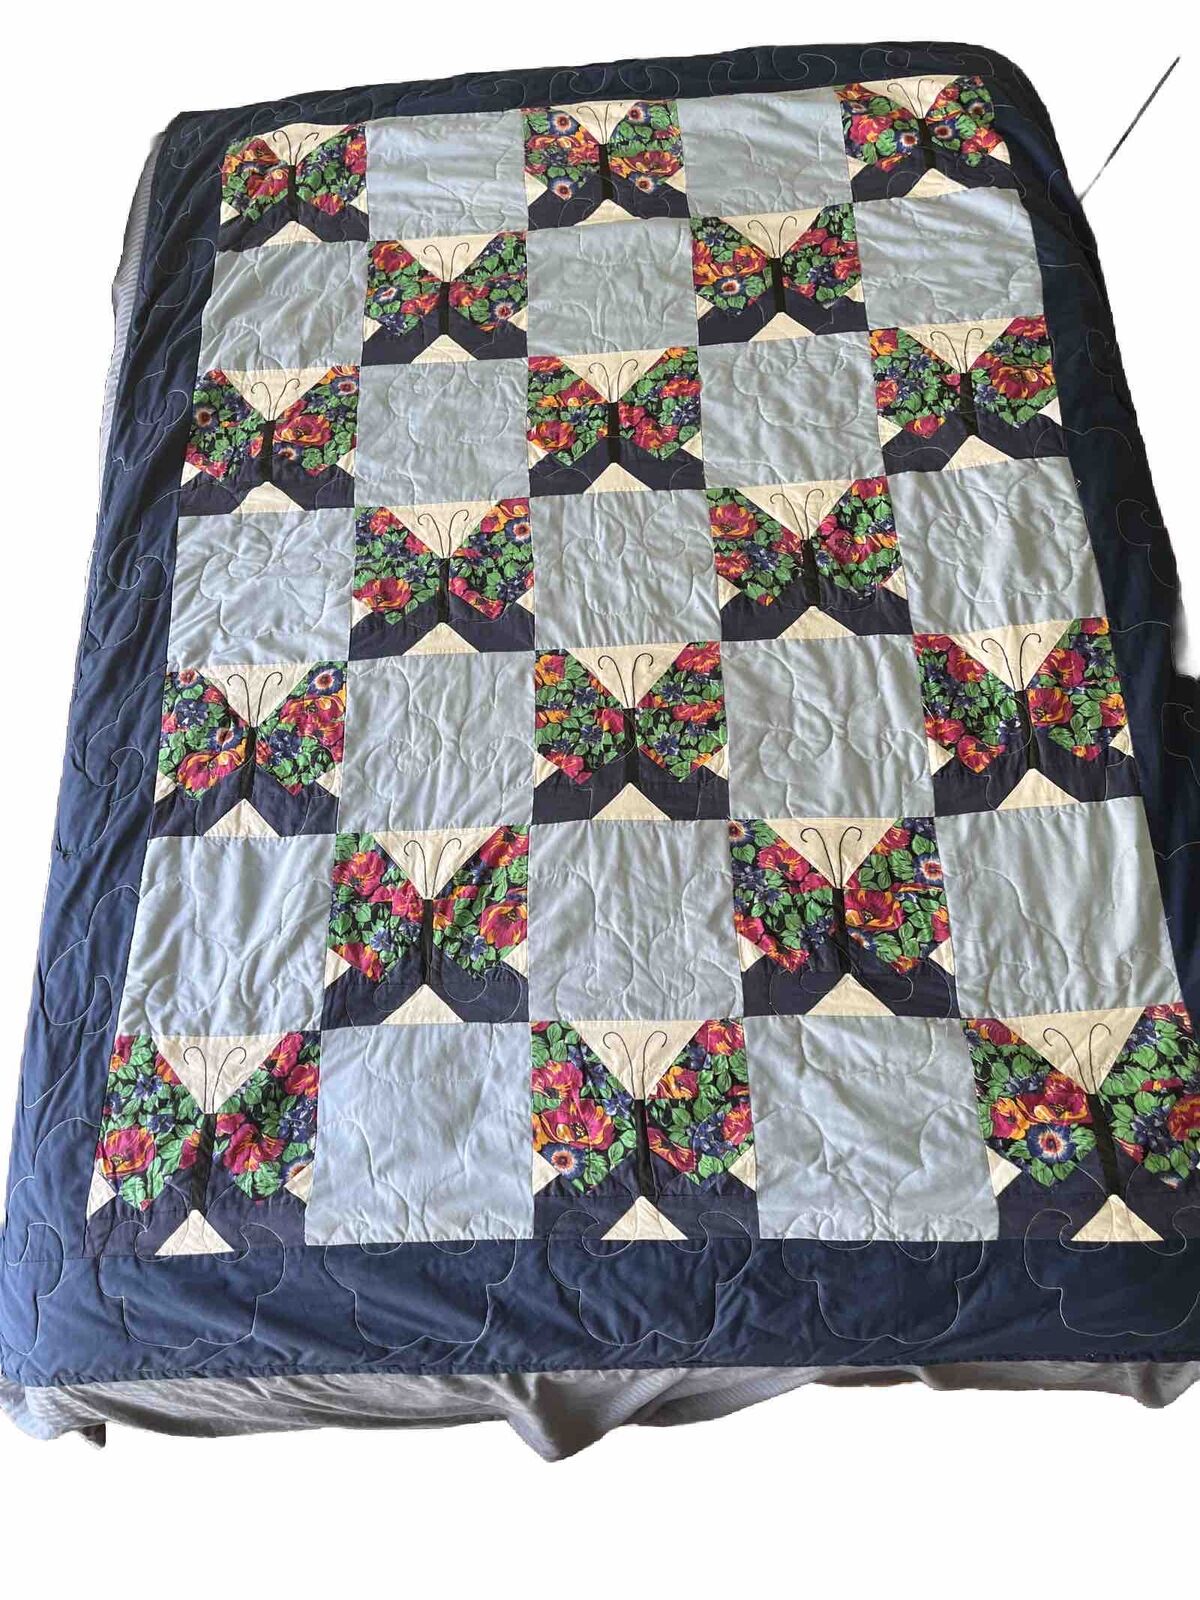 Handmade Butterfly Quilt Colorful Flowers Blues Pinks Queen Full Twin 58” By 80”